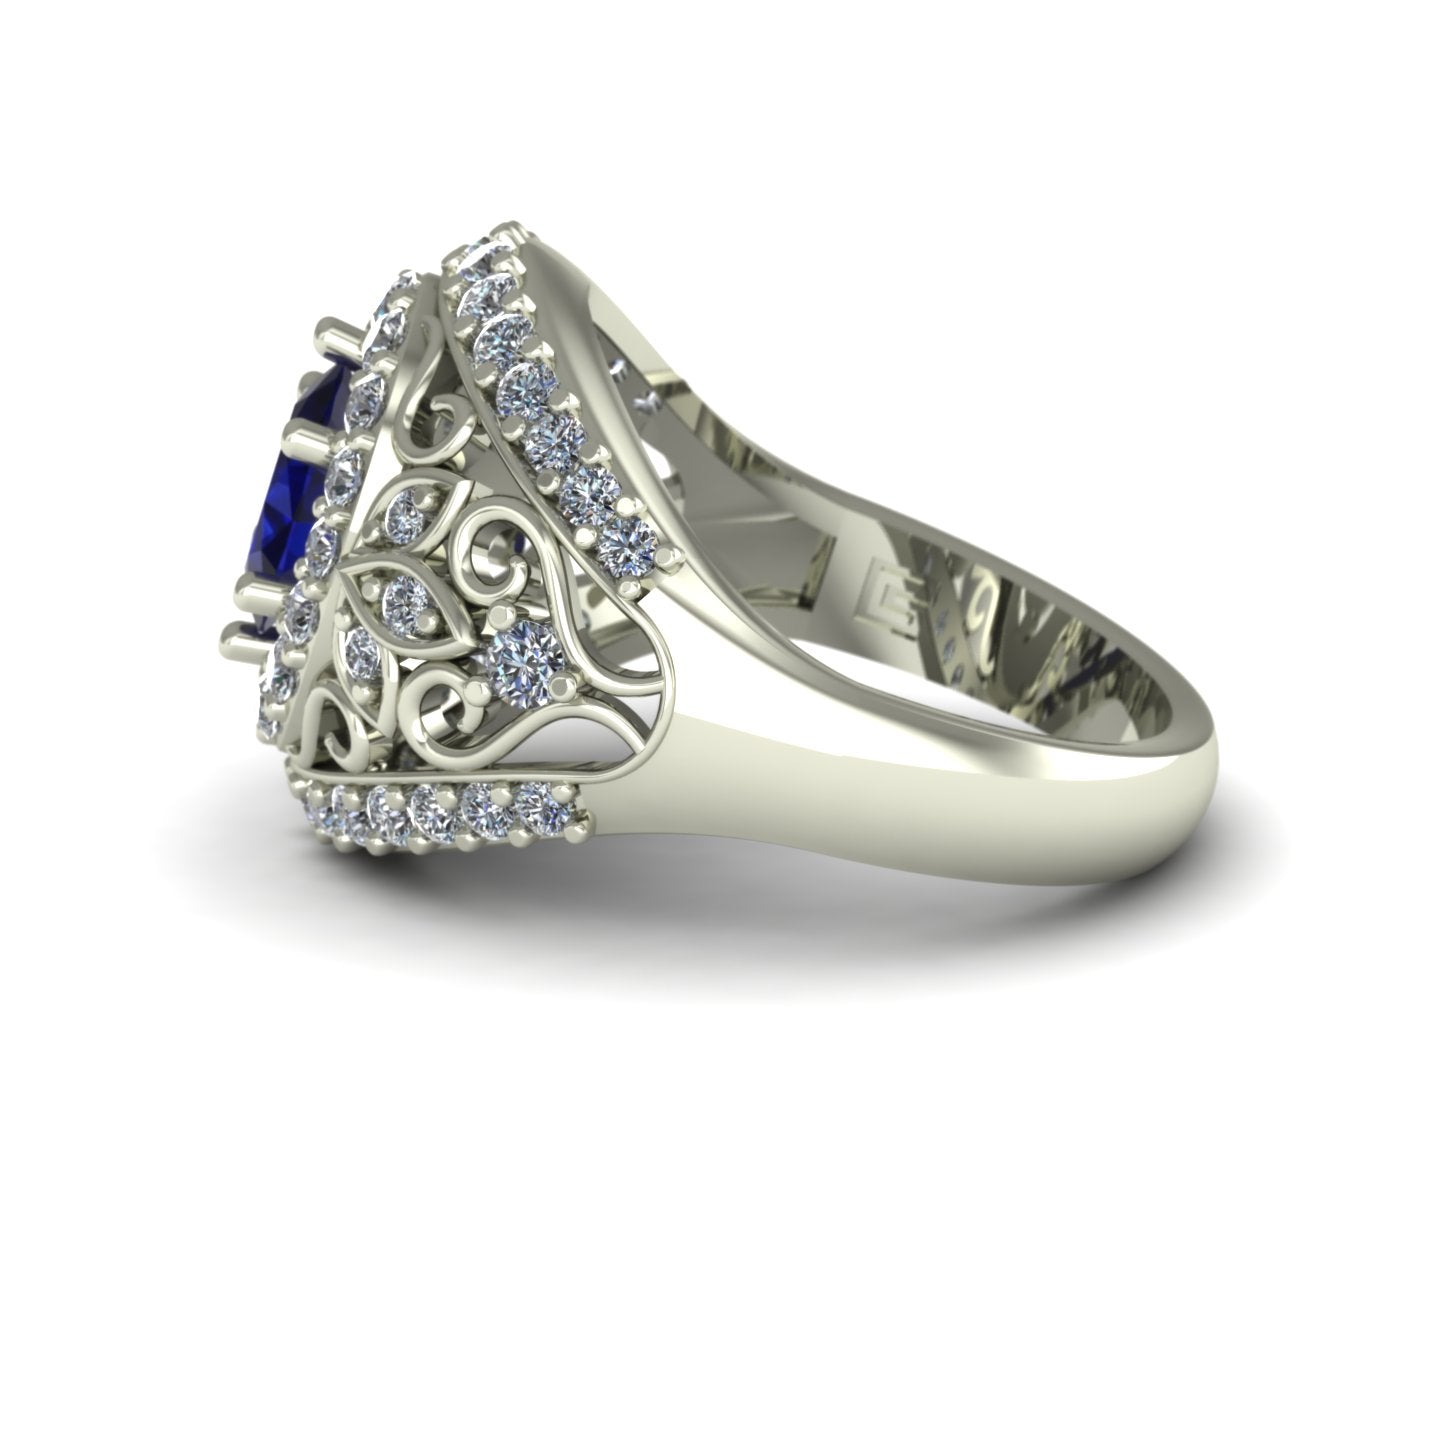 oval blue sapphire and diamond dome ring in 14k white gold - Charles Babb Designs - side view